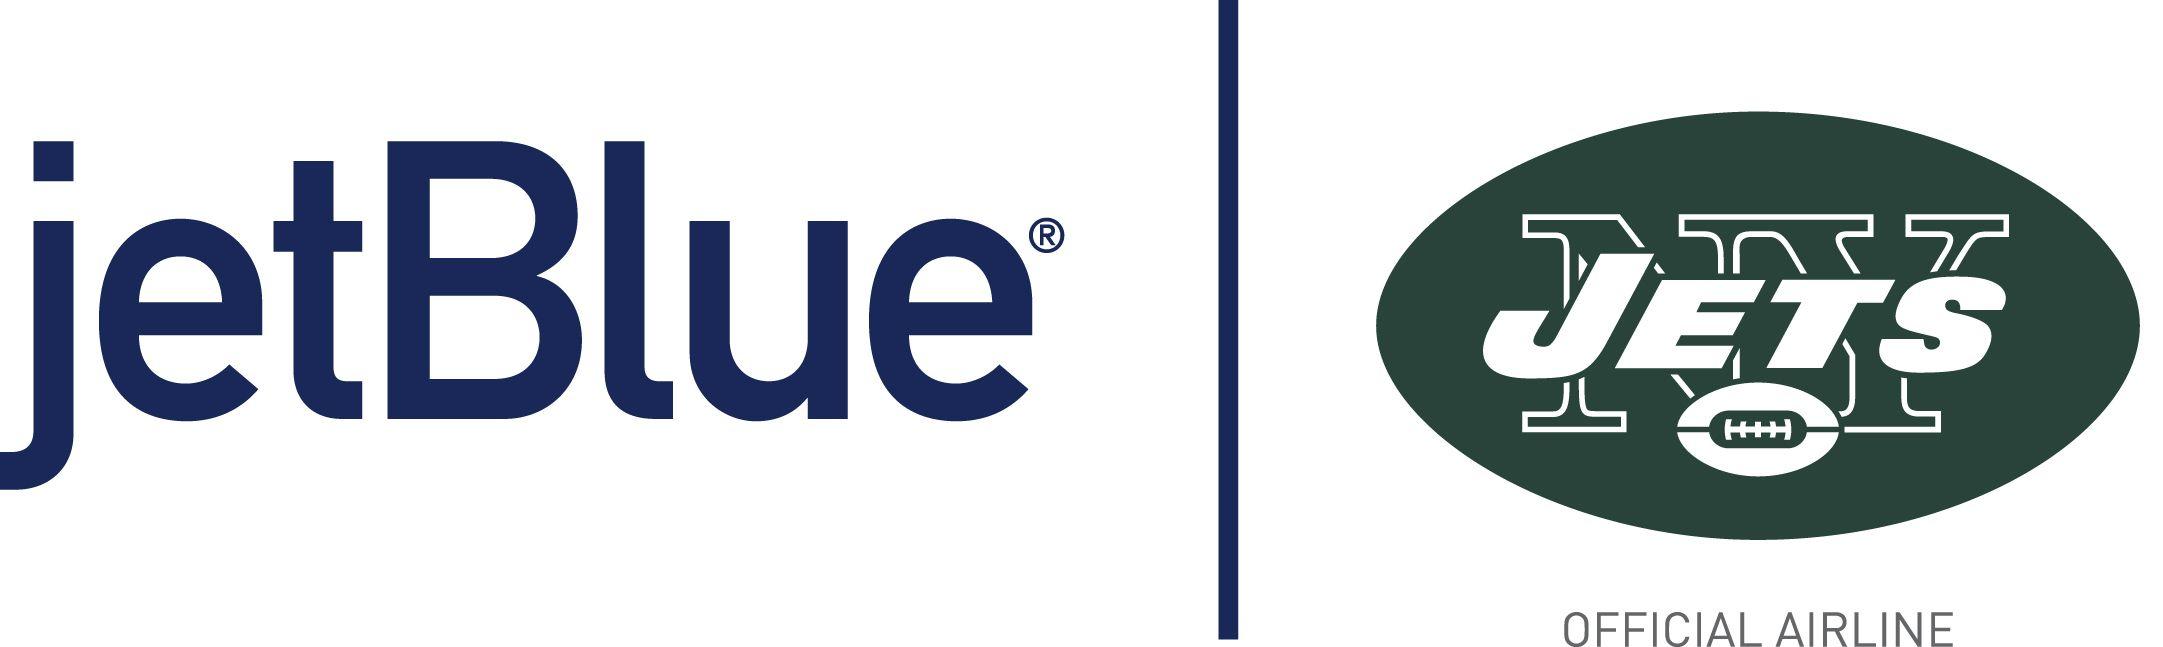 JetBlue Airlines Logo - JetBlue, New York's Hometown Airline®, Celebrates its Home Field